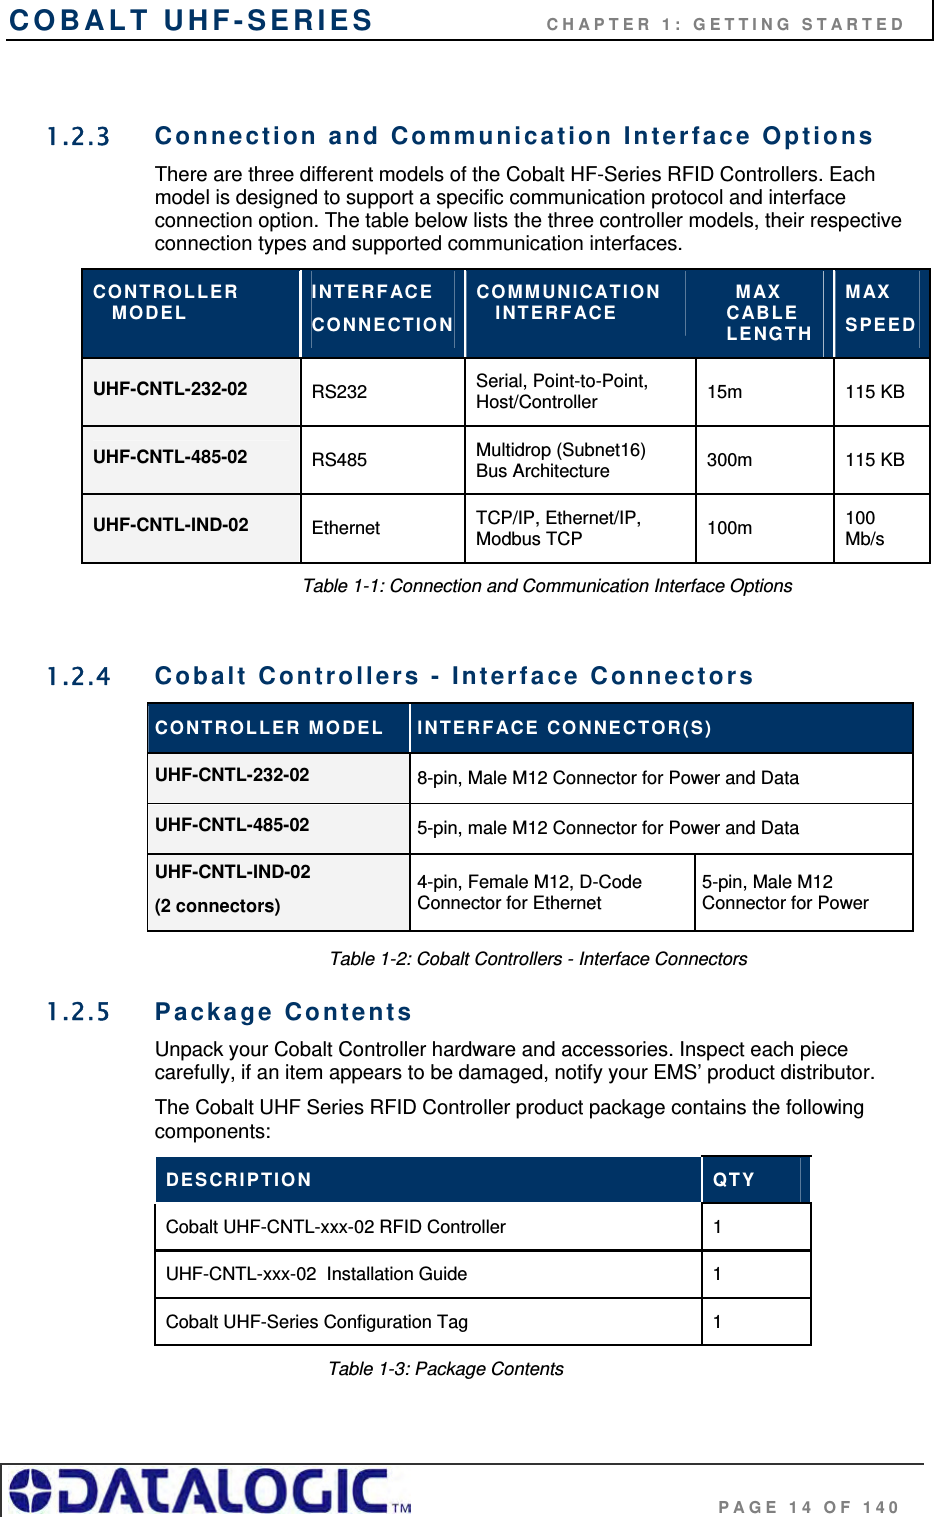 COBALT UHF-SERIES                    CHAPTER 1: GETTING STARTED                                     PAGE 14 OF 140  1.2.3  Connection and Communication Interface Options  There are three different models of the Cobalt HF-Series RFID Controllers. Each model is designed to support a specific communication protocol and interface connection option. The table below lists the three controller models, their respective connection types and supported communication interfaces. CONTROLLER MODEL  INTERFACE CONNECTIONCOMMUNICATION INTERFACE      MAX CABLE LENGTH MAX SPEEDUHF-CNTL-232-02  RS232  Serial, Point-to-Point, Host/Controller  15m 115 KB UHF-CNTL-485-02  RS485  Multidrop (Subnet16) Bus Architecture  300m 115 KB UHF-CNTL-IND-02  Ethernet  TCP/IP, Ethernet/IP, Modbus TCP  100m  100 Mb/s Table 1-1: Connection and Communication Interface Options  1.2.4  Cobalt Controllers - Interface Connectors CONTROLLER MODEL  INTERFACE CONNECTOR(S) UHF-CNTL-232-02  8-pin, Male M12 Connector for Power and Data UHF-CNTL-485-02  5-pin, male M12 Connector for Power and Data UHF-CNTL-IND-02 (2 connectors) 4-pin, Female M12, D-Code Connector for Ethernet 5-pin, Male M12 Connector for Power Table 1-2: Cobalt Controllers - Interface Connectors 1.2.5 Package Contents Unpack your Cobalt Controller hardware and accessories. Inspect each piece carefully, if an item appears to be damaged, notify your EMS’ product distributor. The Cobalt UHF Series RFID Controller product package contains the following components: DESCRIPTION  QTY Cobalt UHF-CNTL-xxx-02 RFID Controller  1 UHF-CNTL-xxx-02  Installation Guide  1 Cobalt UHF-Series Configuration Tag  1                                   Table 1-3: Package Contents 